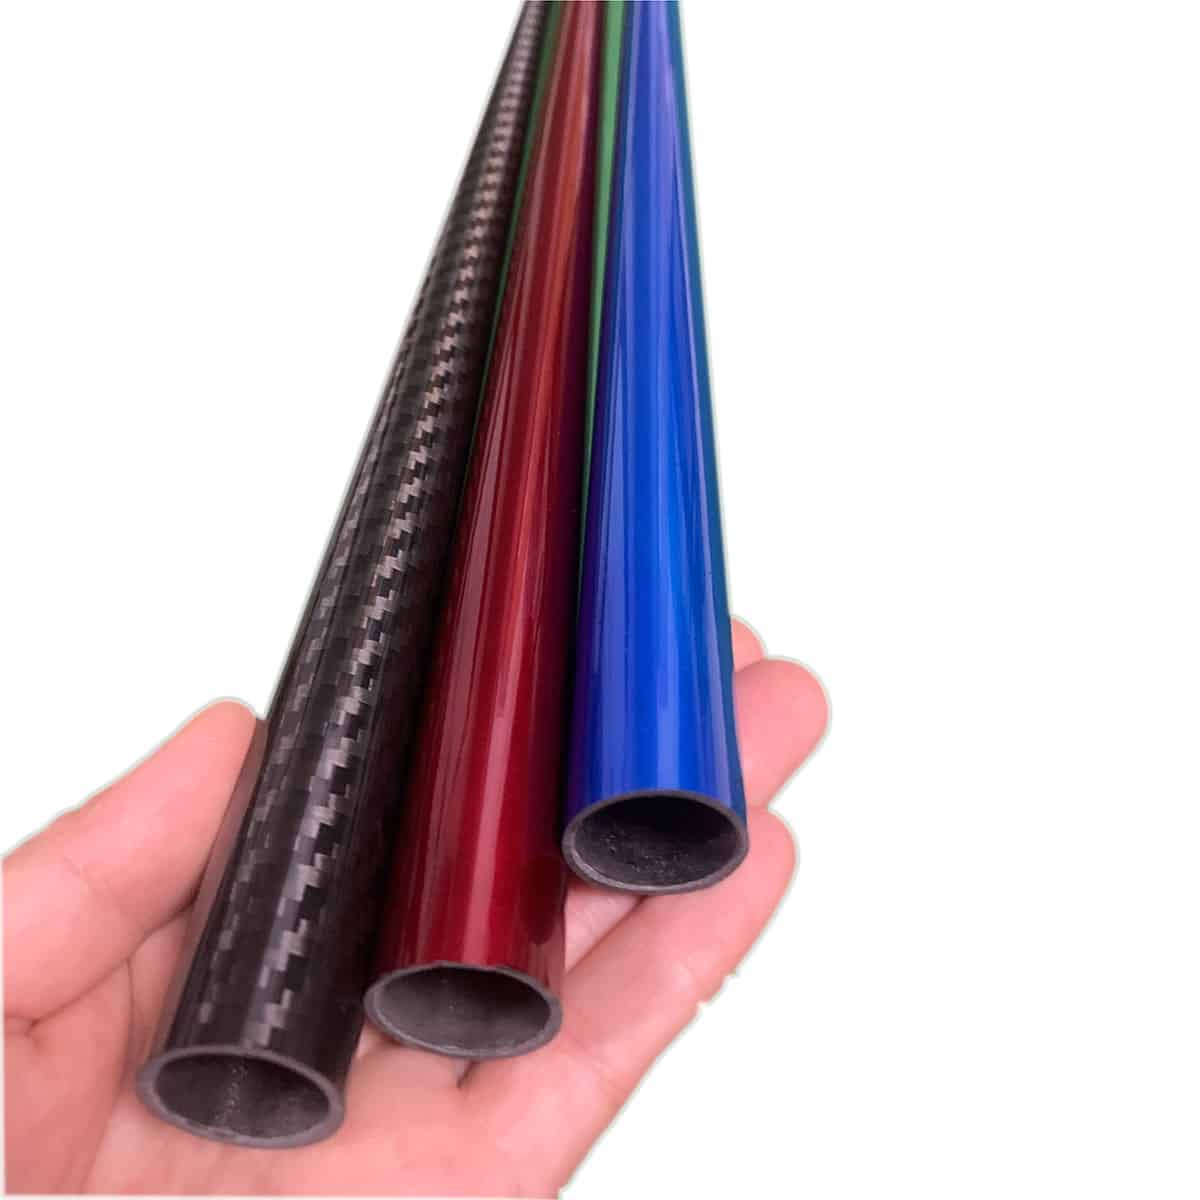 Pro Taper Filled with Foam 12.0 mm BLANK Carbon Fiber Pool Cue Shaft Tubes 